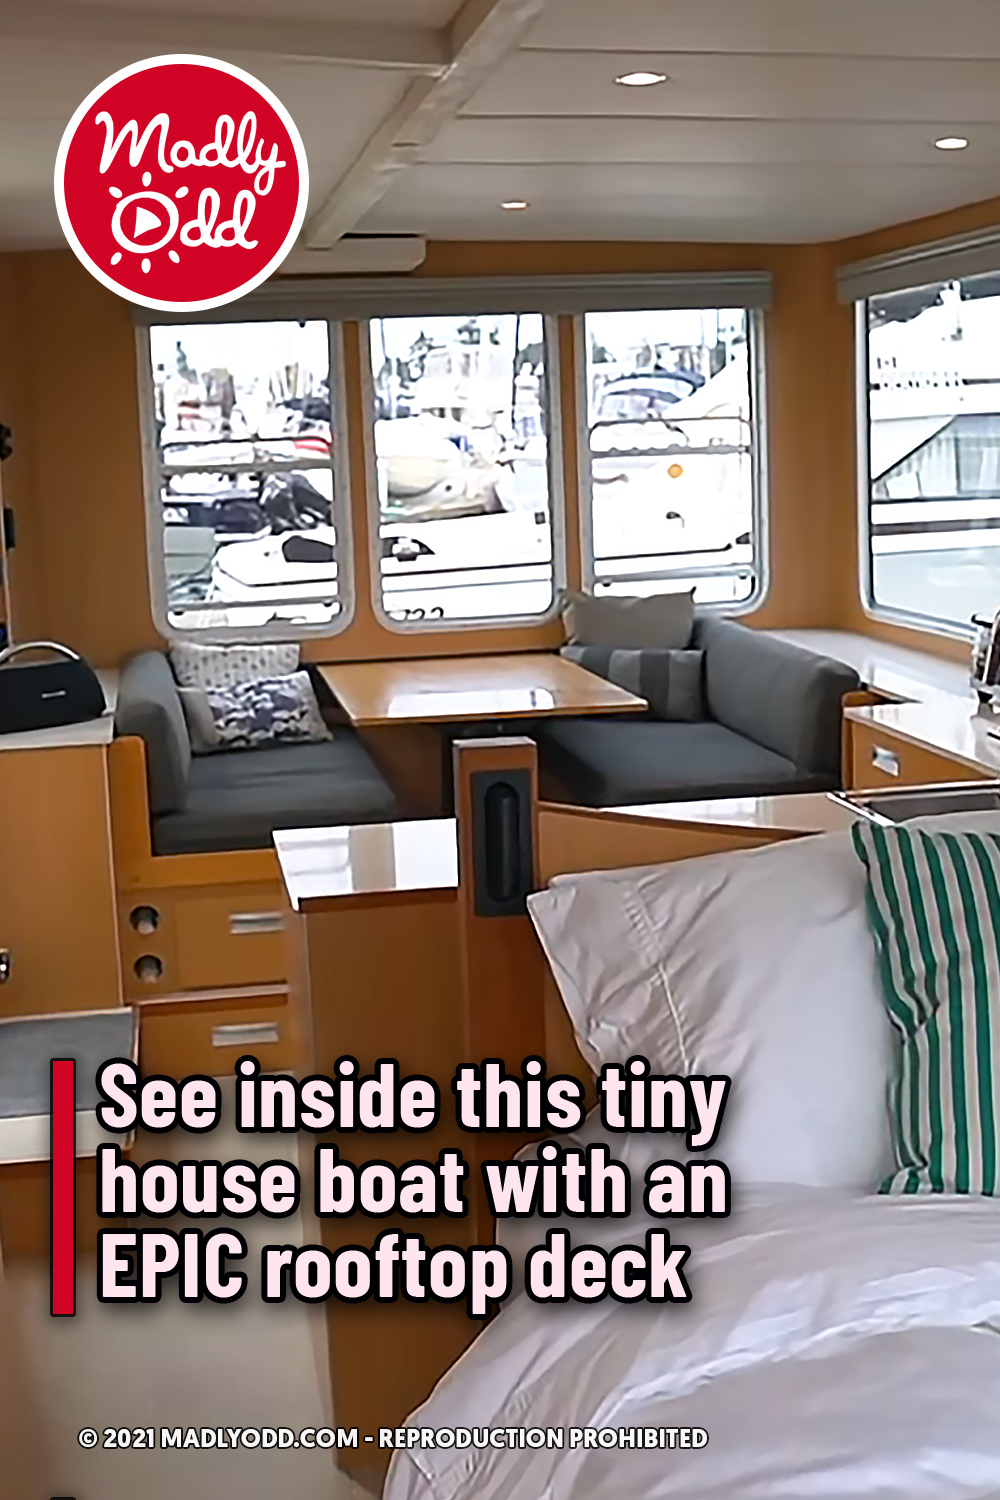 See inside this tiny house boat with an EPIC rooftop deck